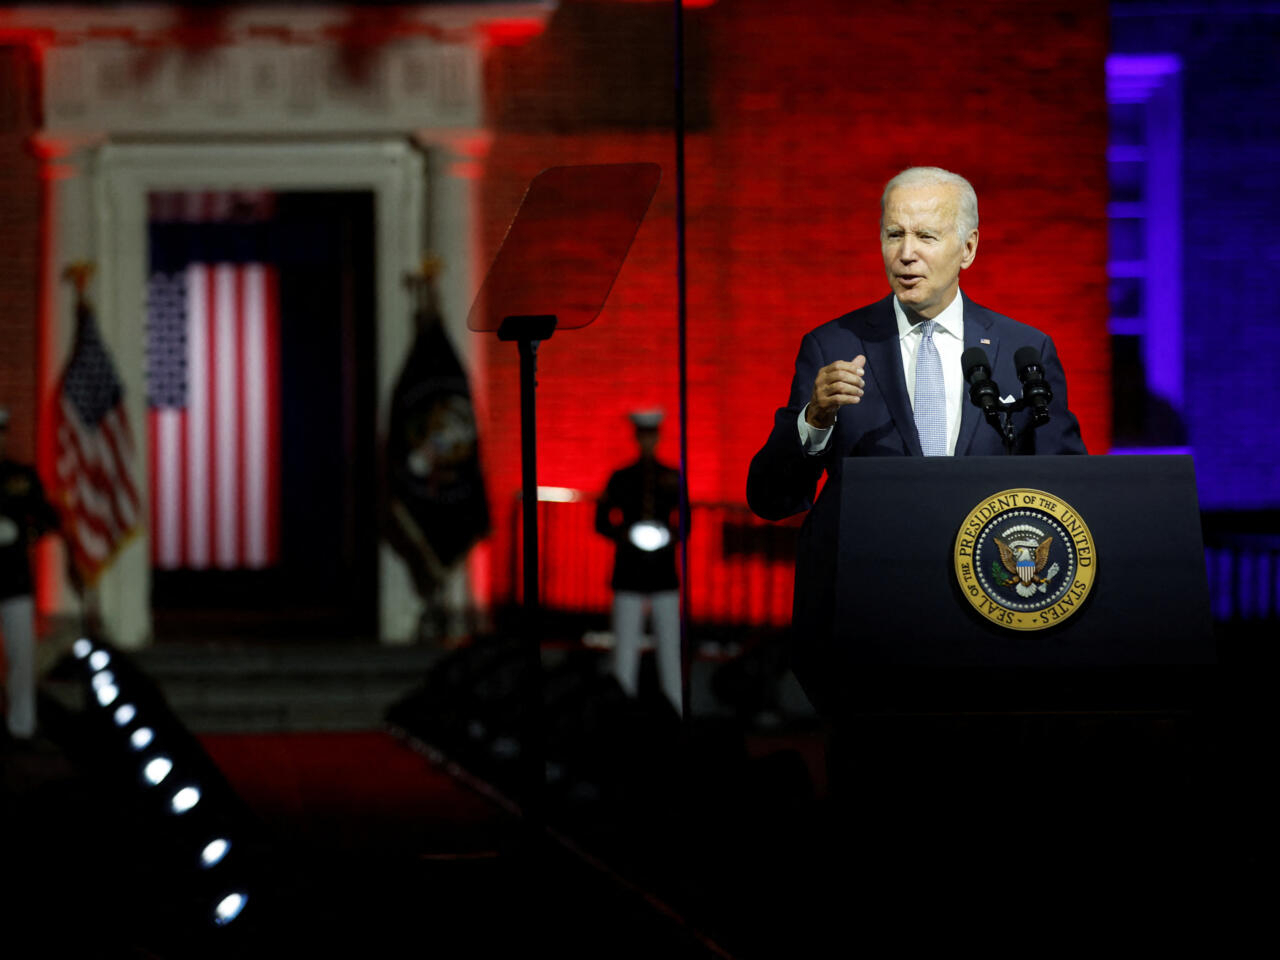 Biden reinforces commitment to unions (Credits: France 24)